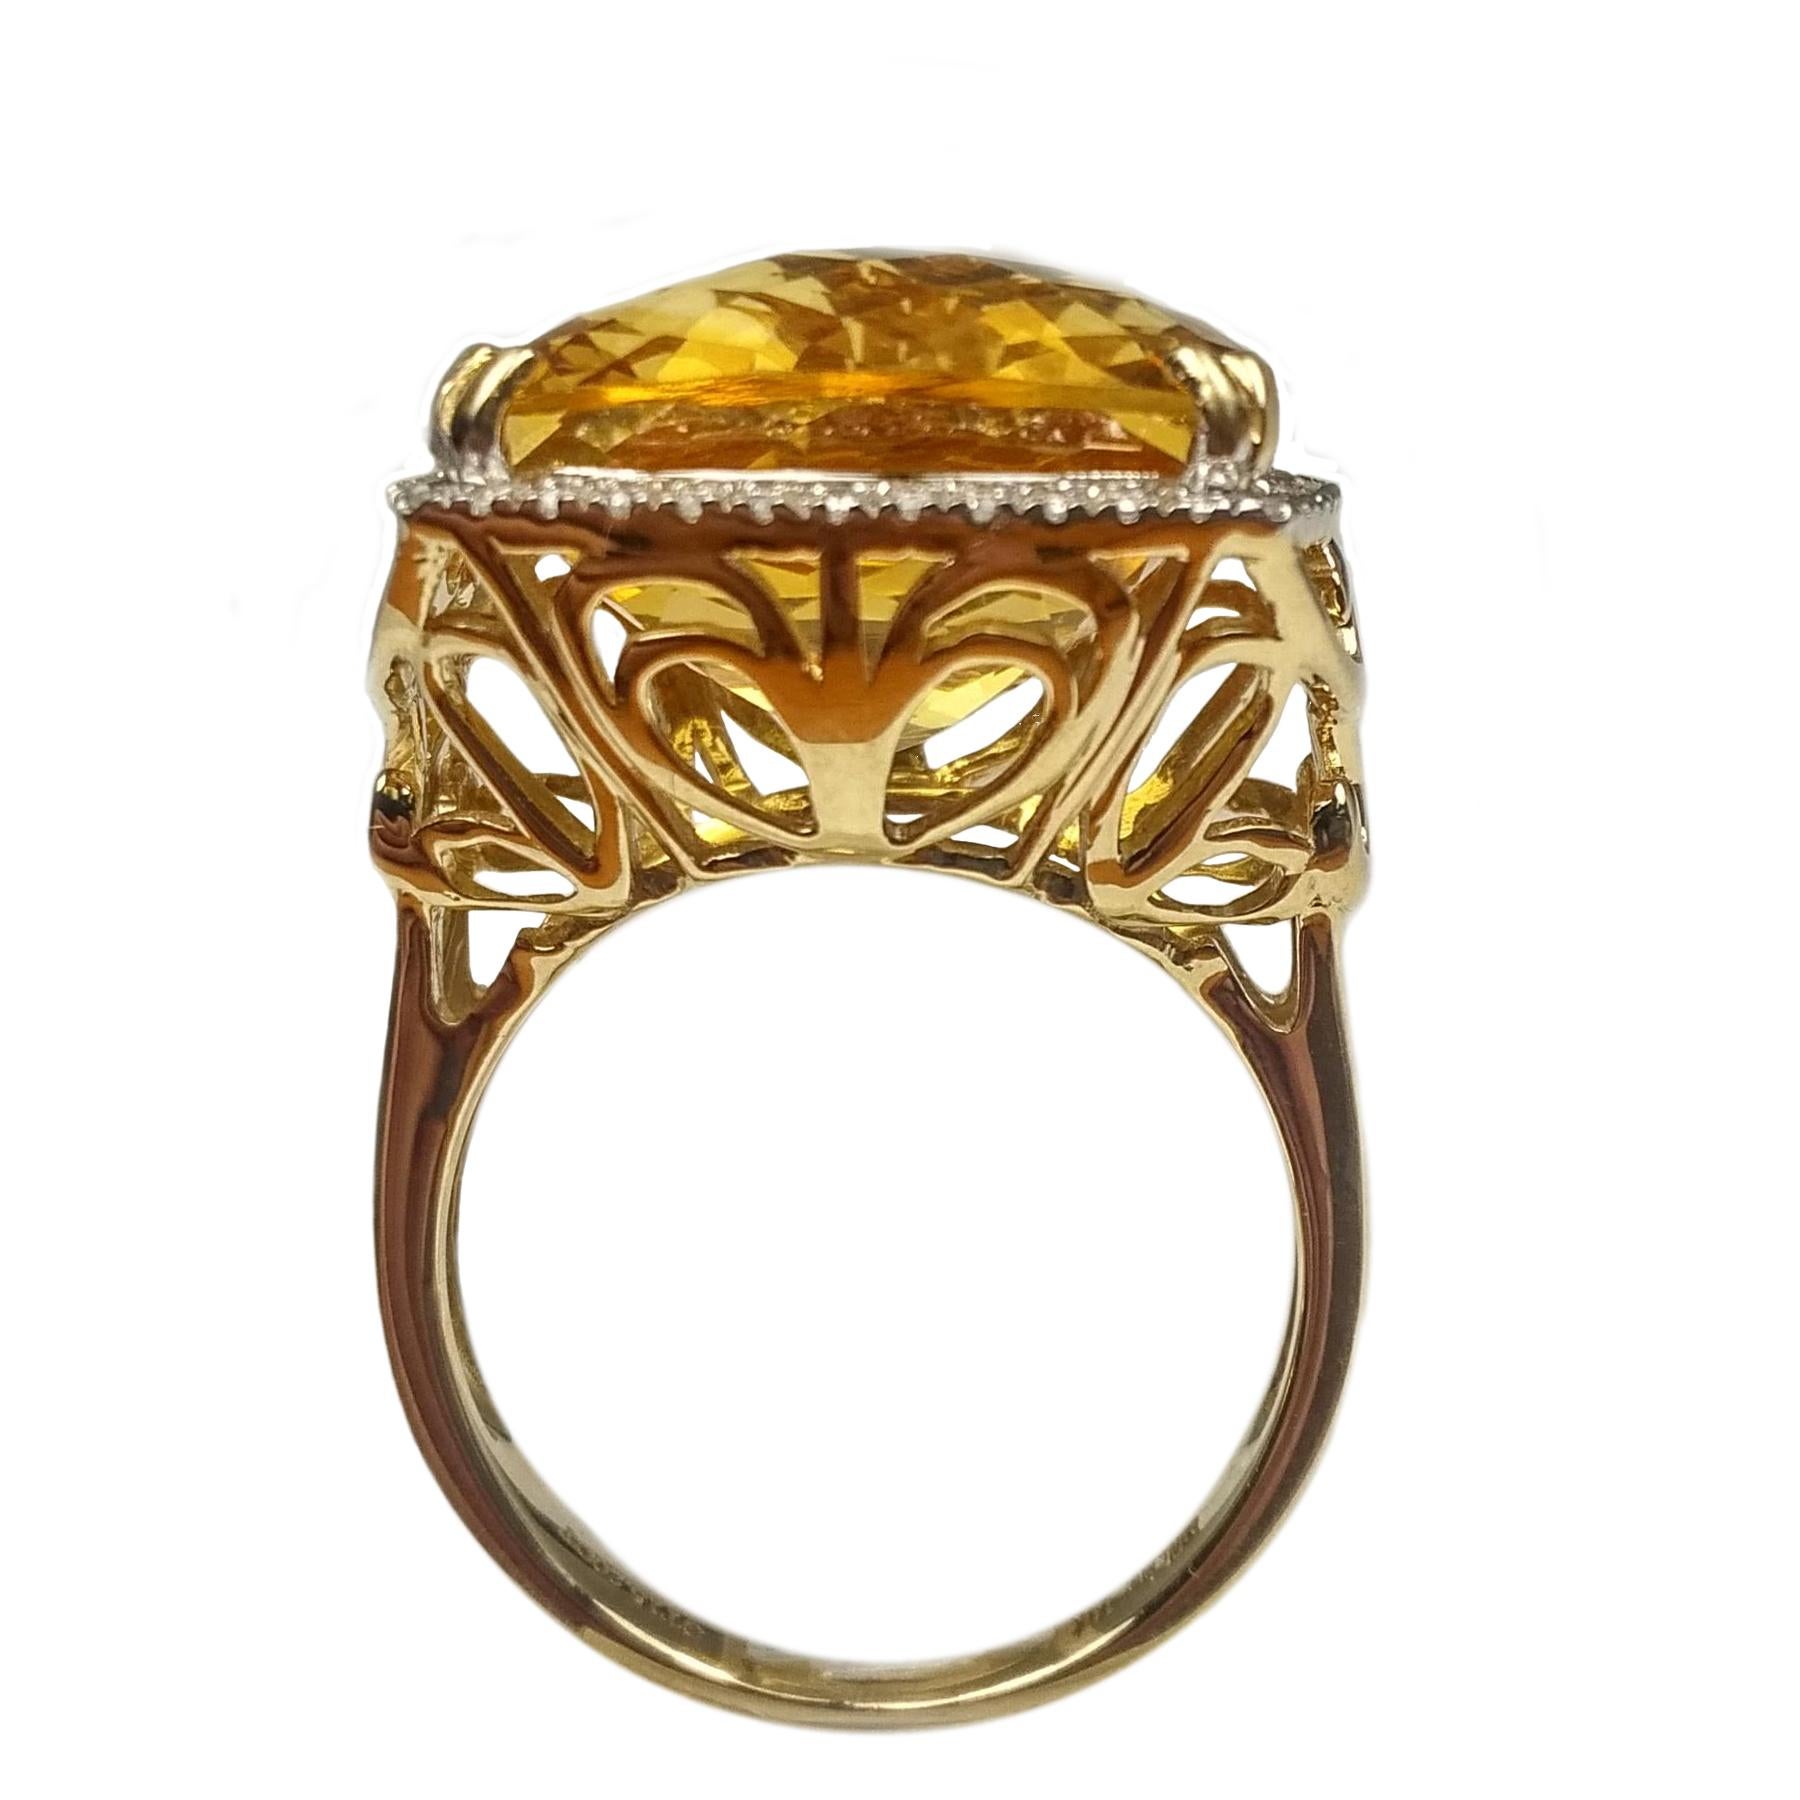 Cocktail citrine and diamond ring. Handcrafted cushion faceted, rich golden honey yellow citrine set in high profile, encased in basket mounting with eight bead prongs,  accented with round brilliant cut diamond frame. Contemporary design set in